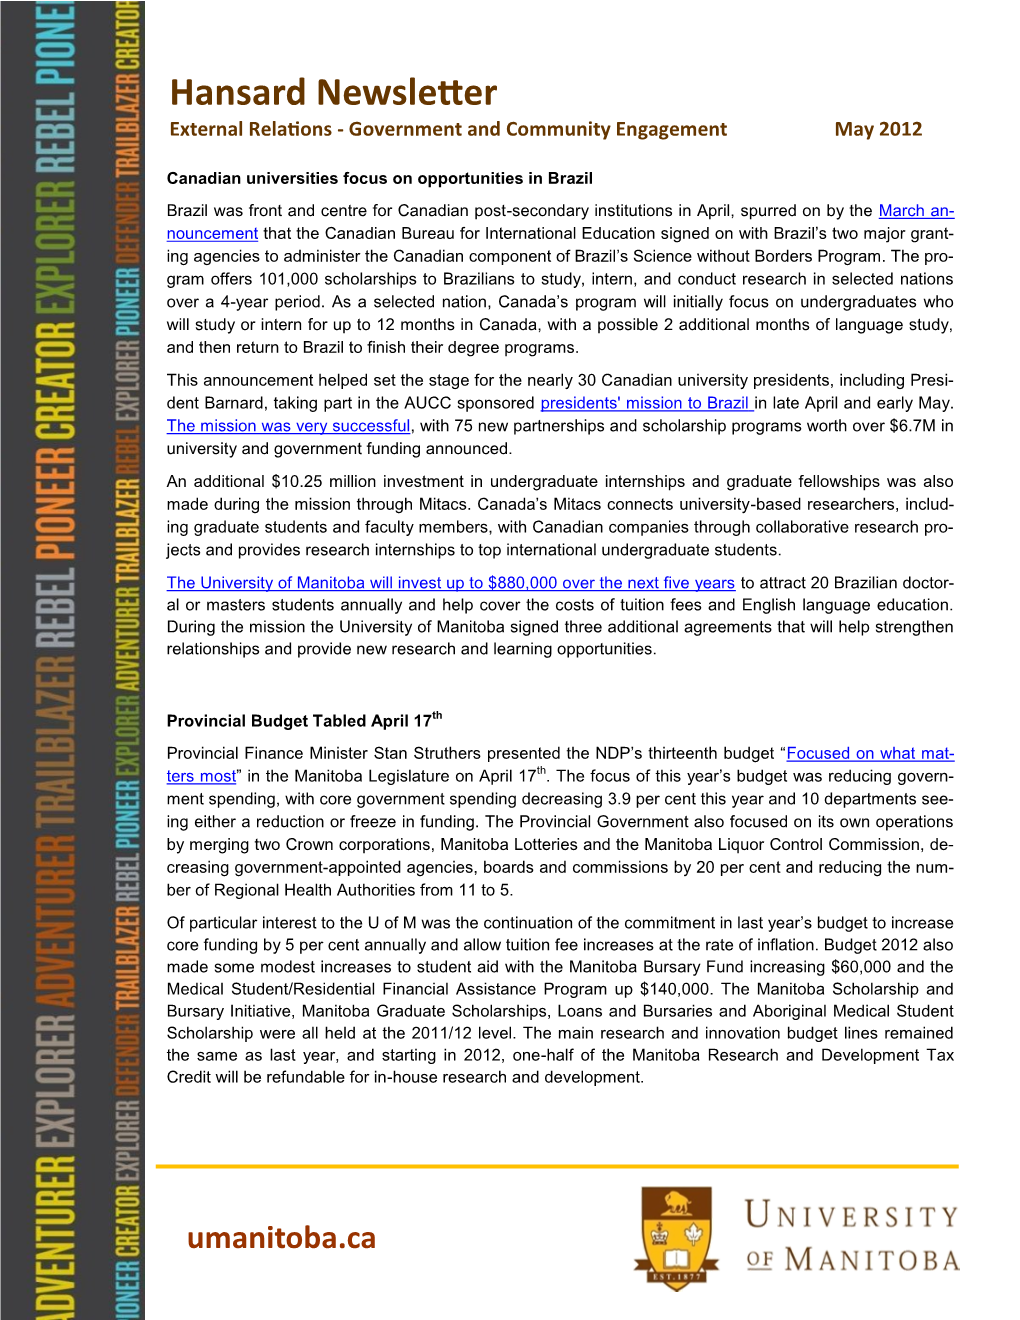 Hansard Newsletter External Relations - Government and Community Engagement May 2012